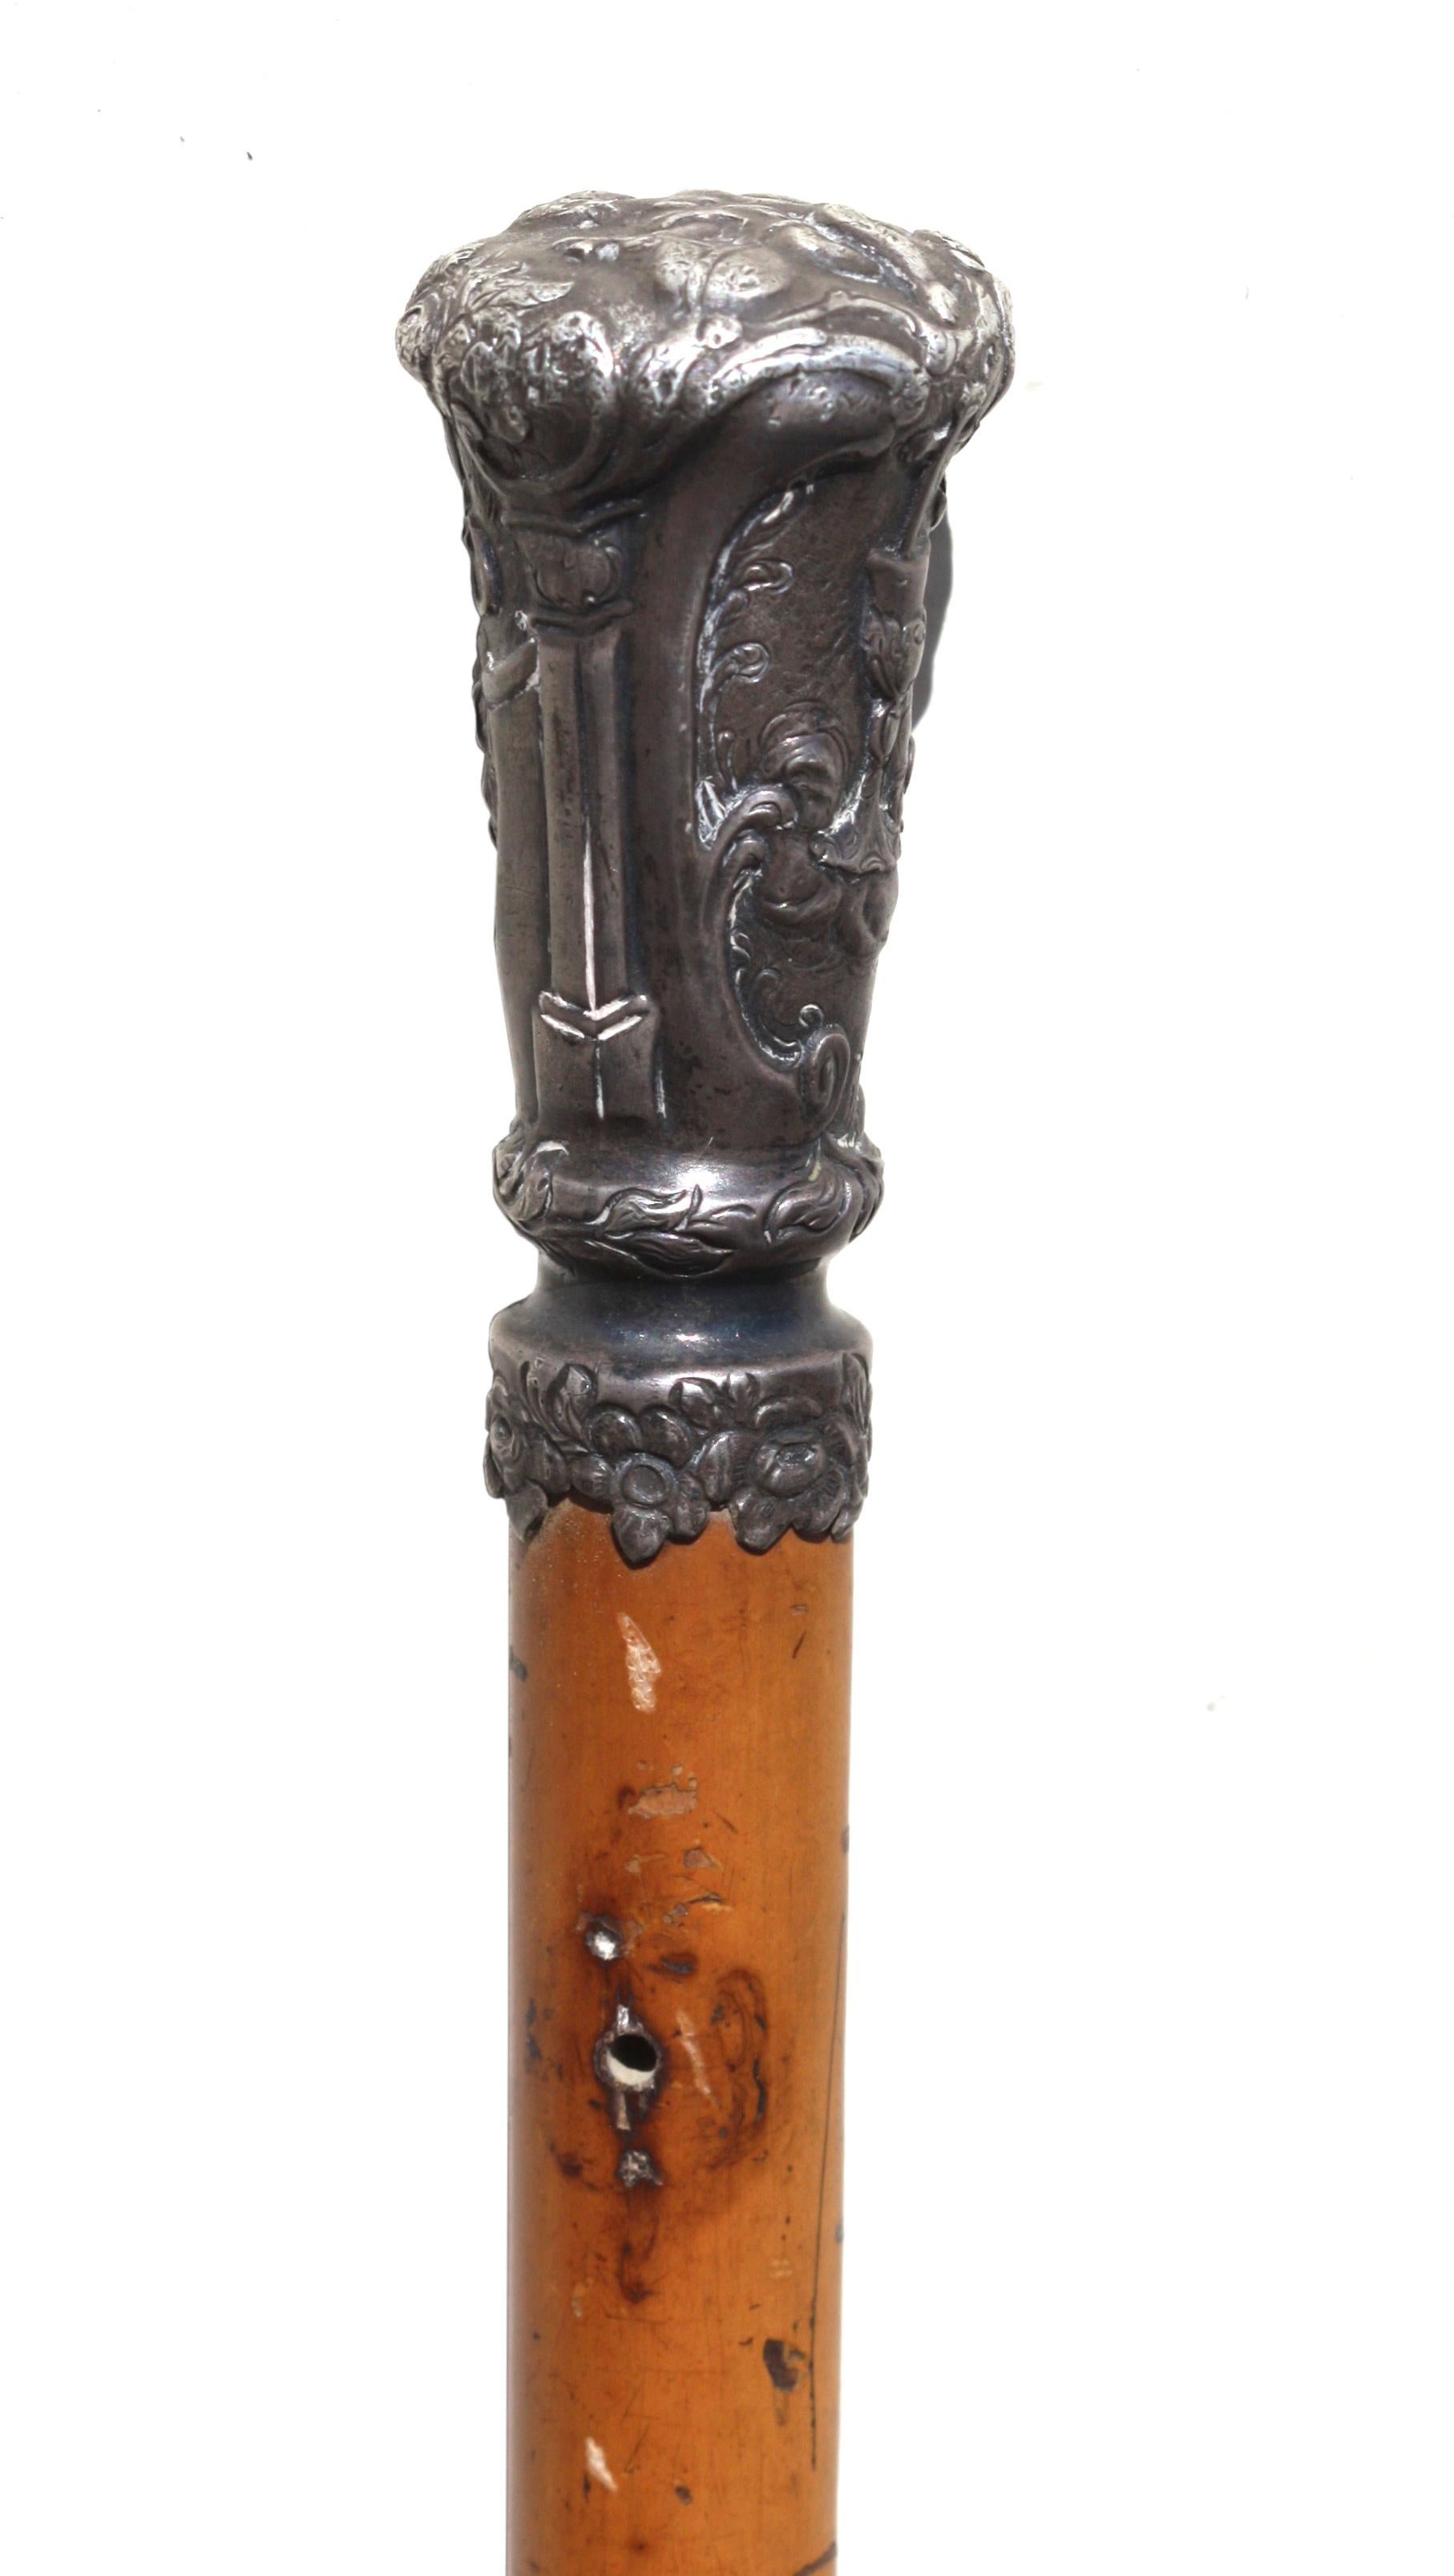 A fine German Silver and Malacca Gentleman's walking stick, 
circa 1770-1790 
the handle elaborately chased with a child holding an orb, an anchor, a heart and a goblet, the tapering malacca shaft ending in a 4 1/4 metal ferrule, 
the handle is